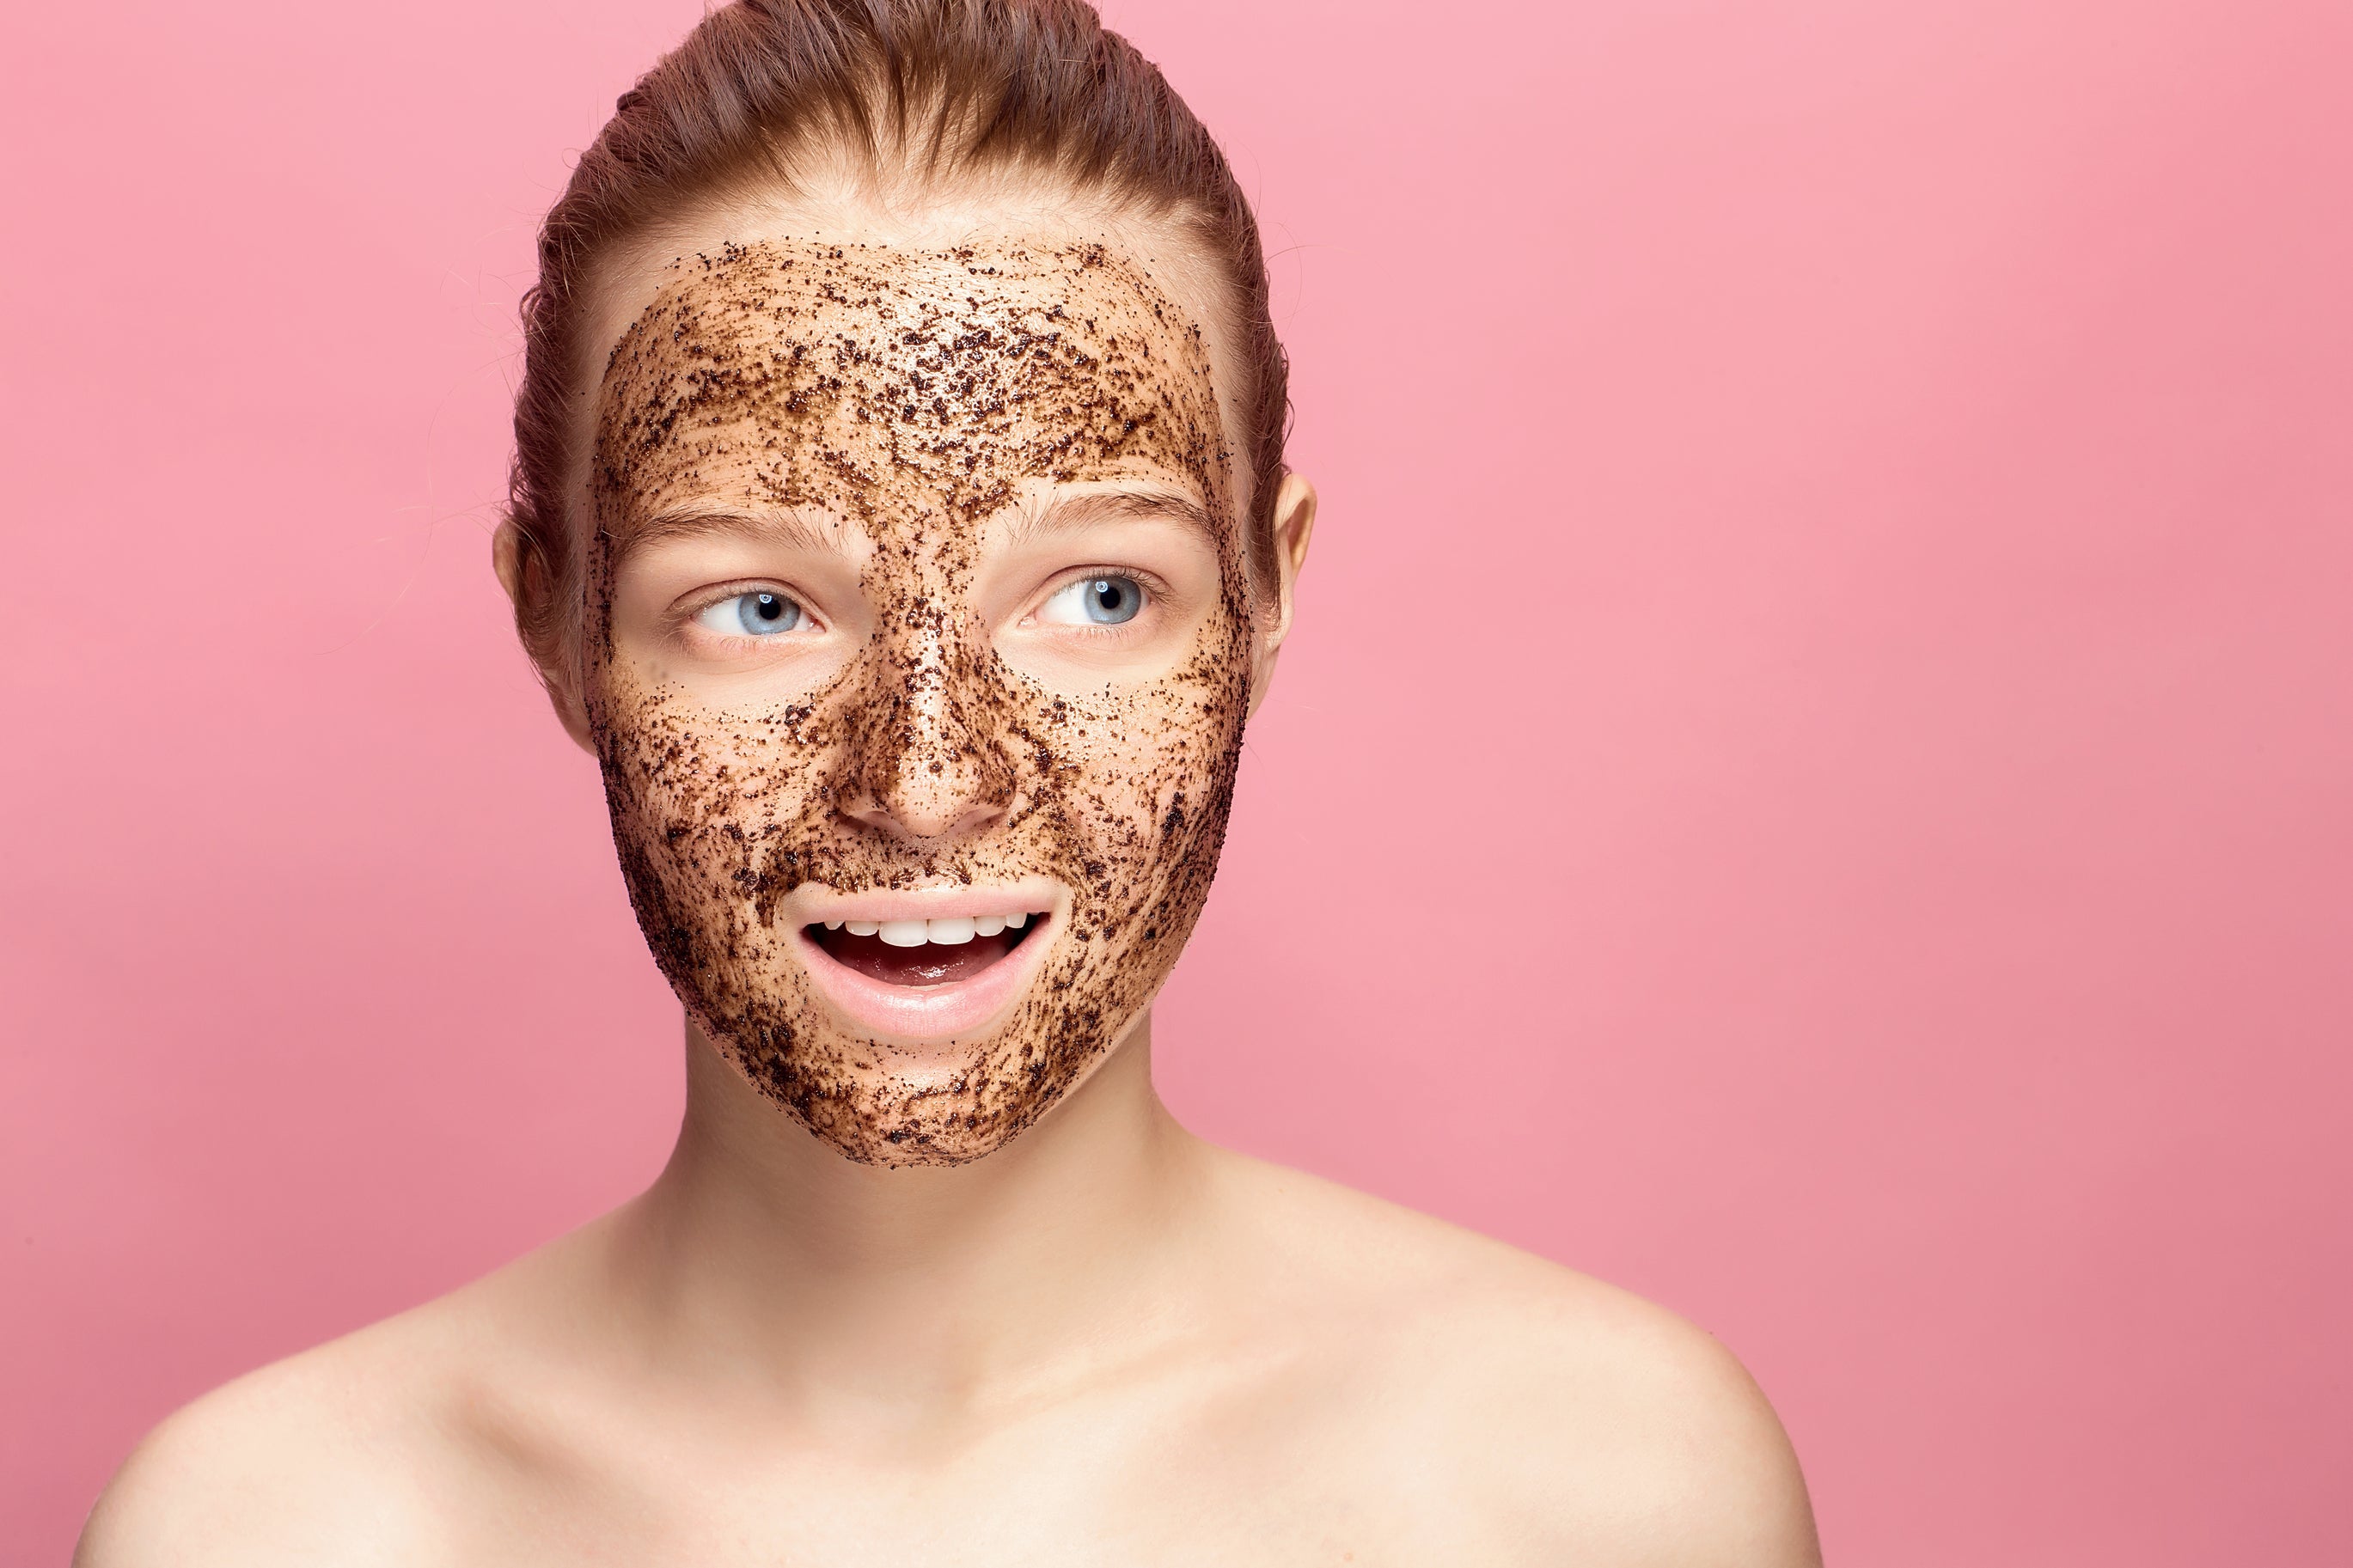 A pregnant woman applies a homemade coffee scrub to her face to exfoliate her skin naturally